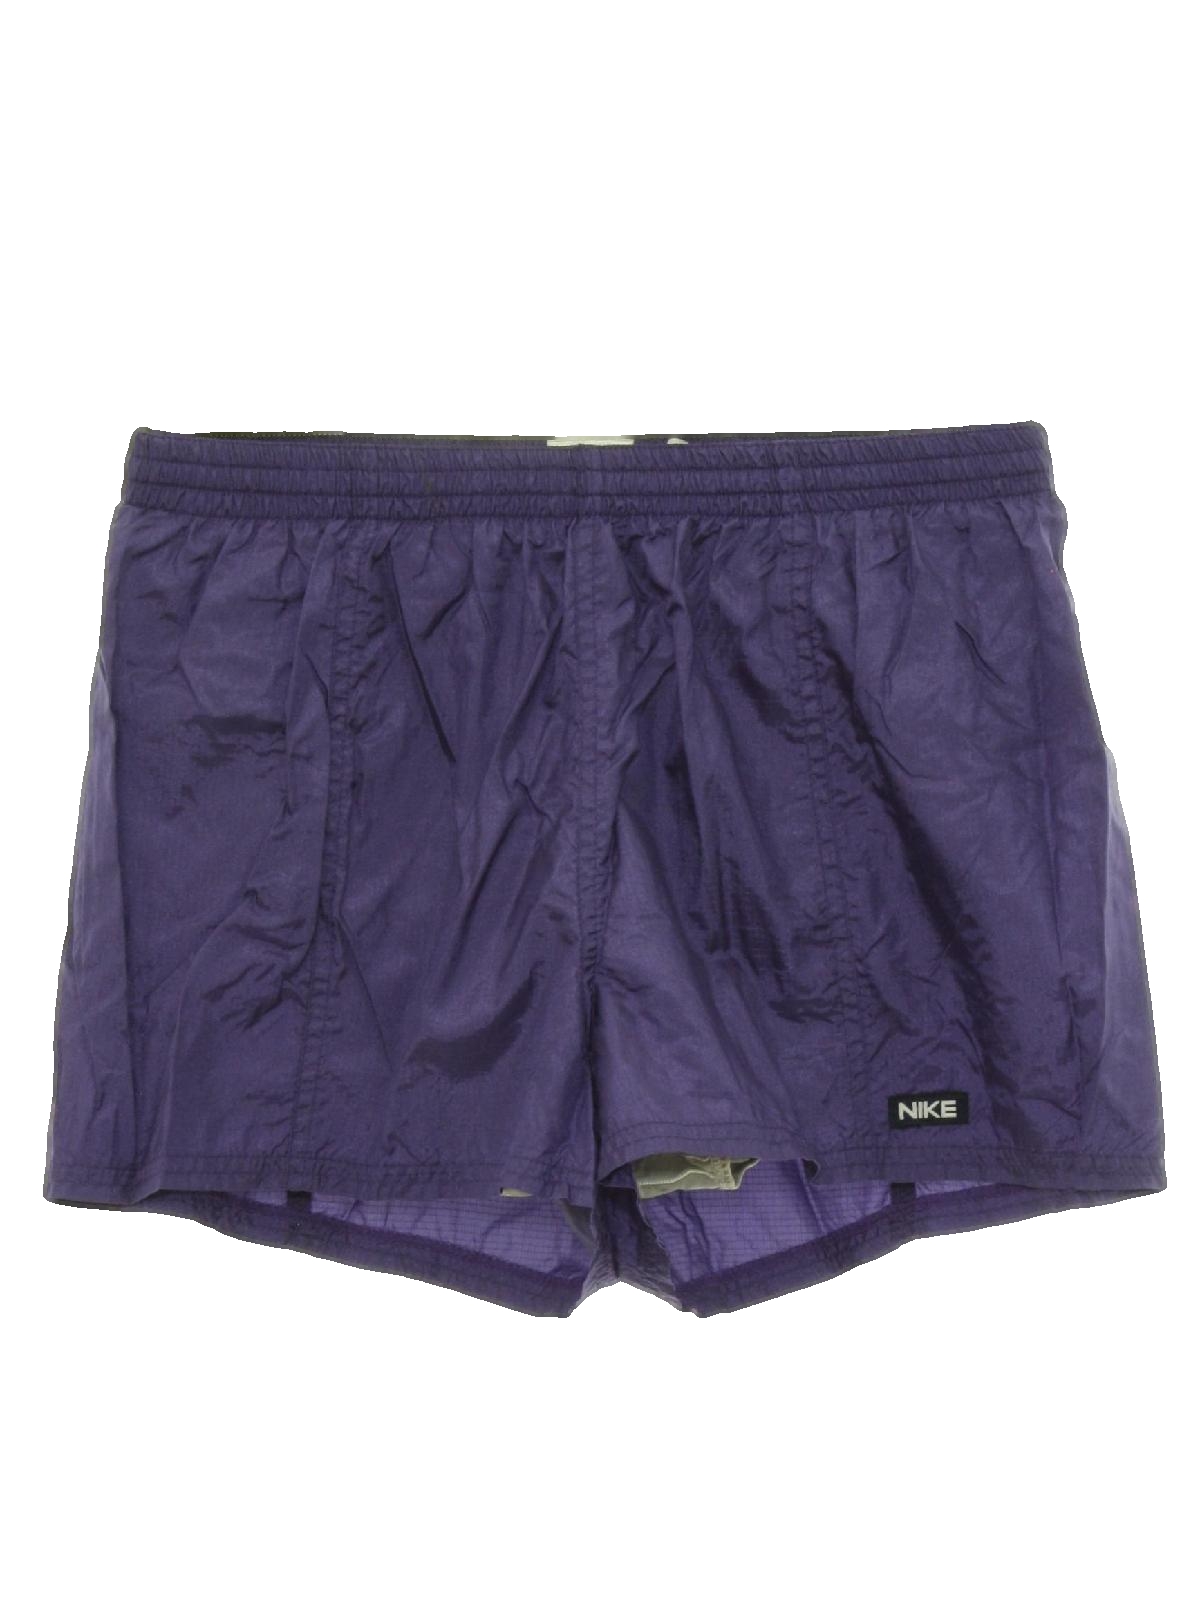 Download 90's Vintage Shorts: 90s -Nike- Womens purple background ...